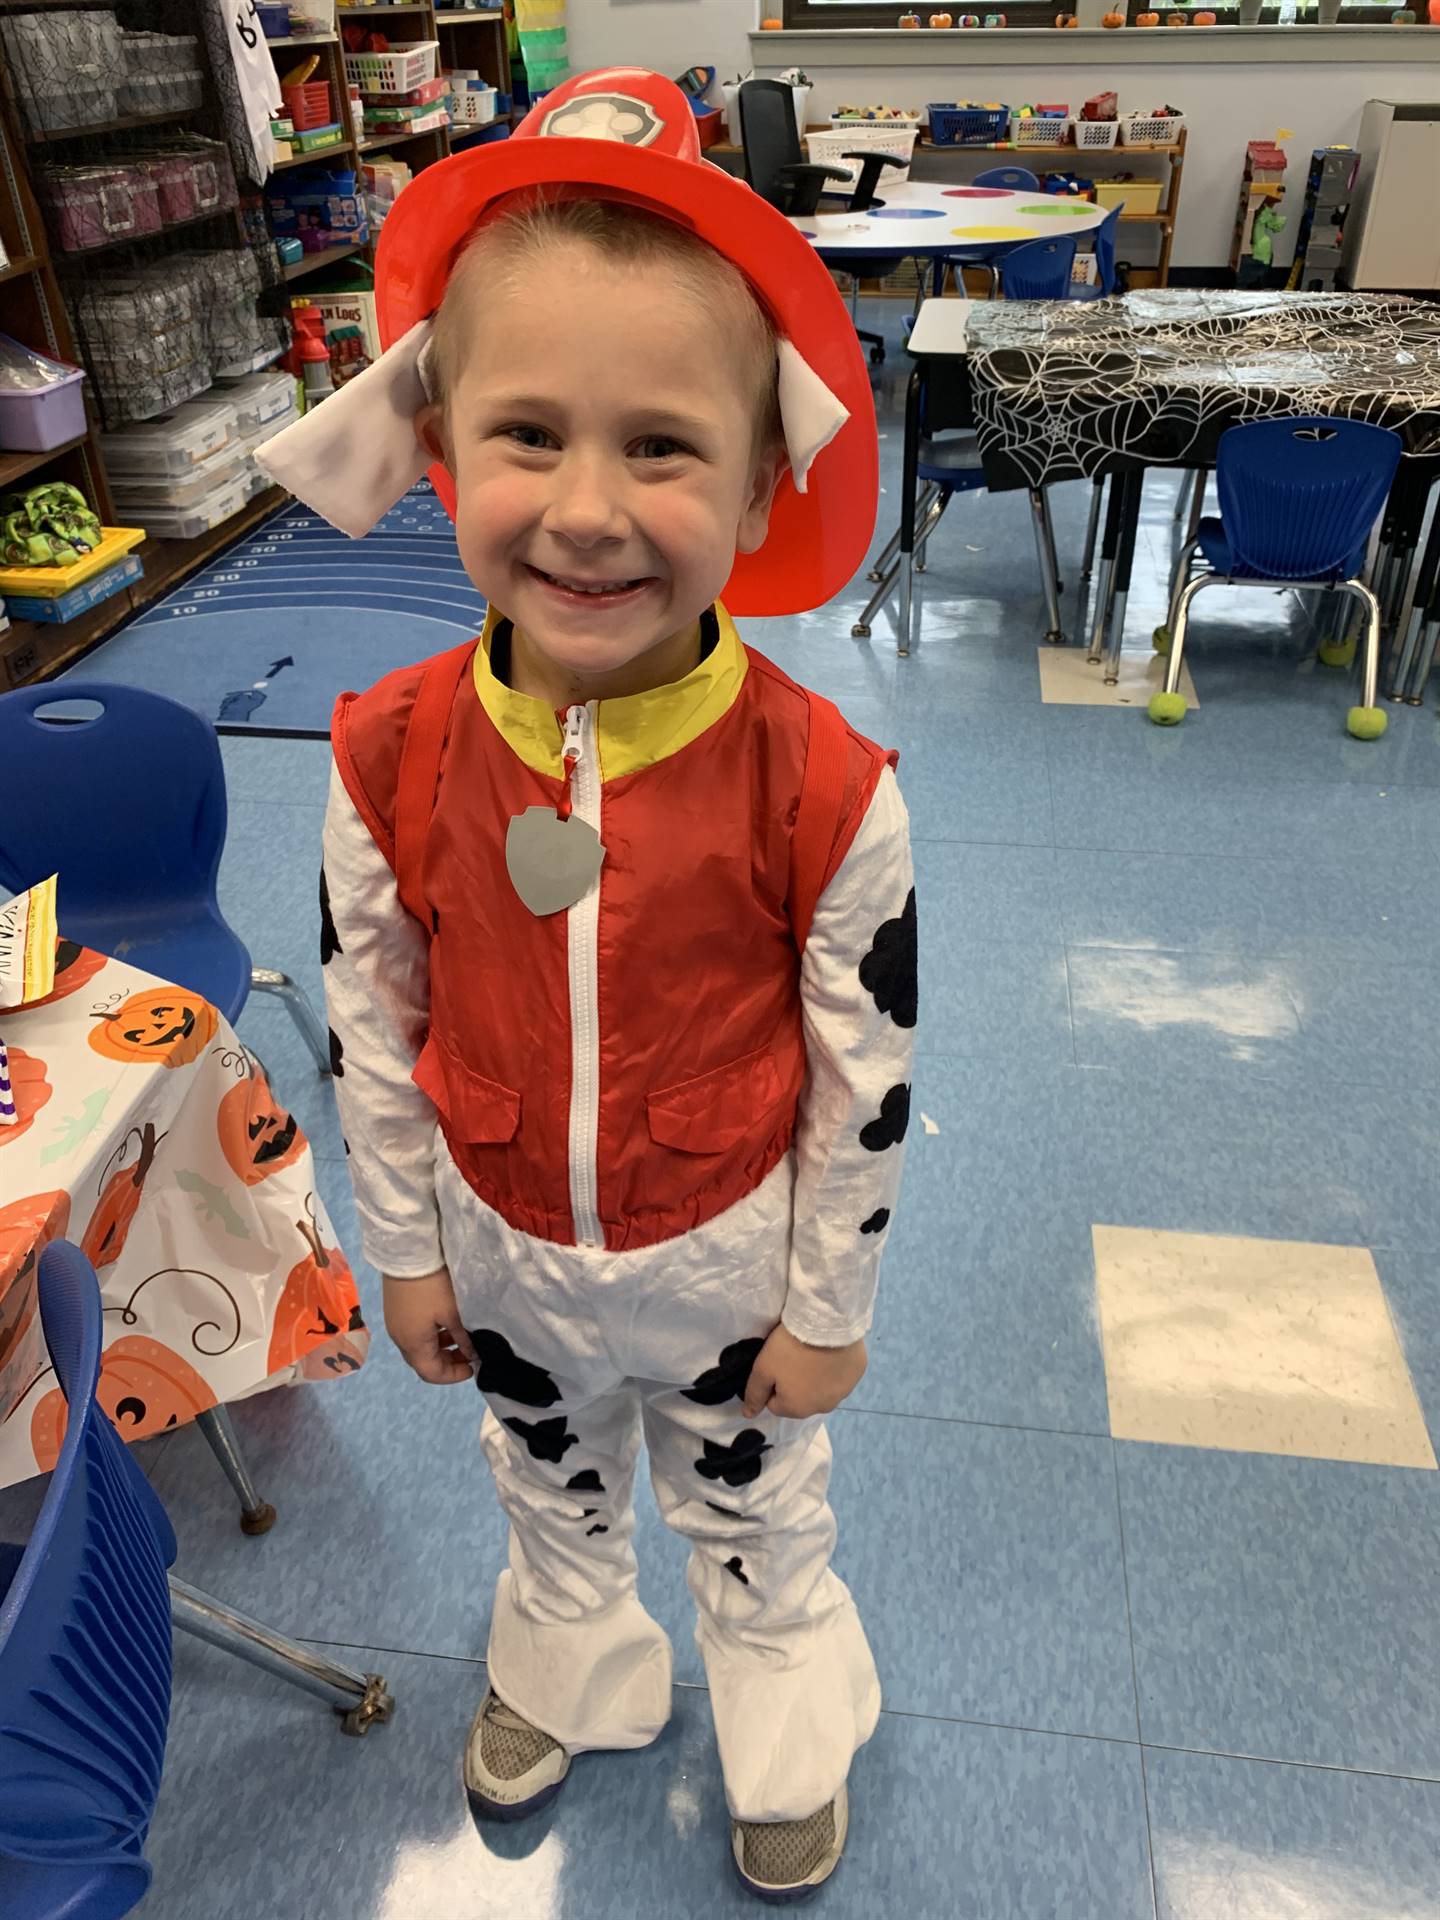 a student dressed as sparky the fire dog